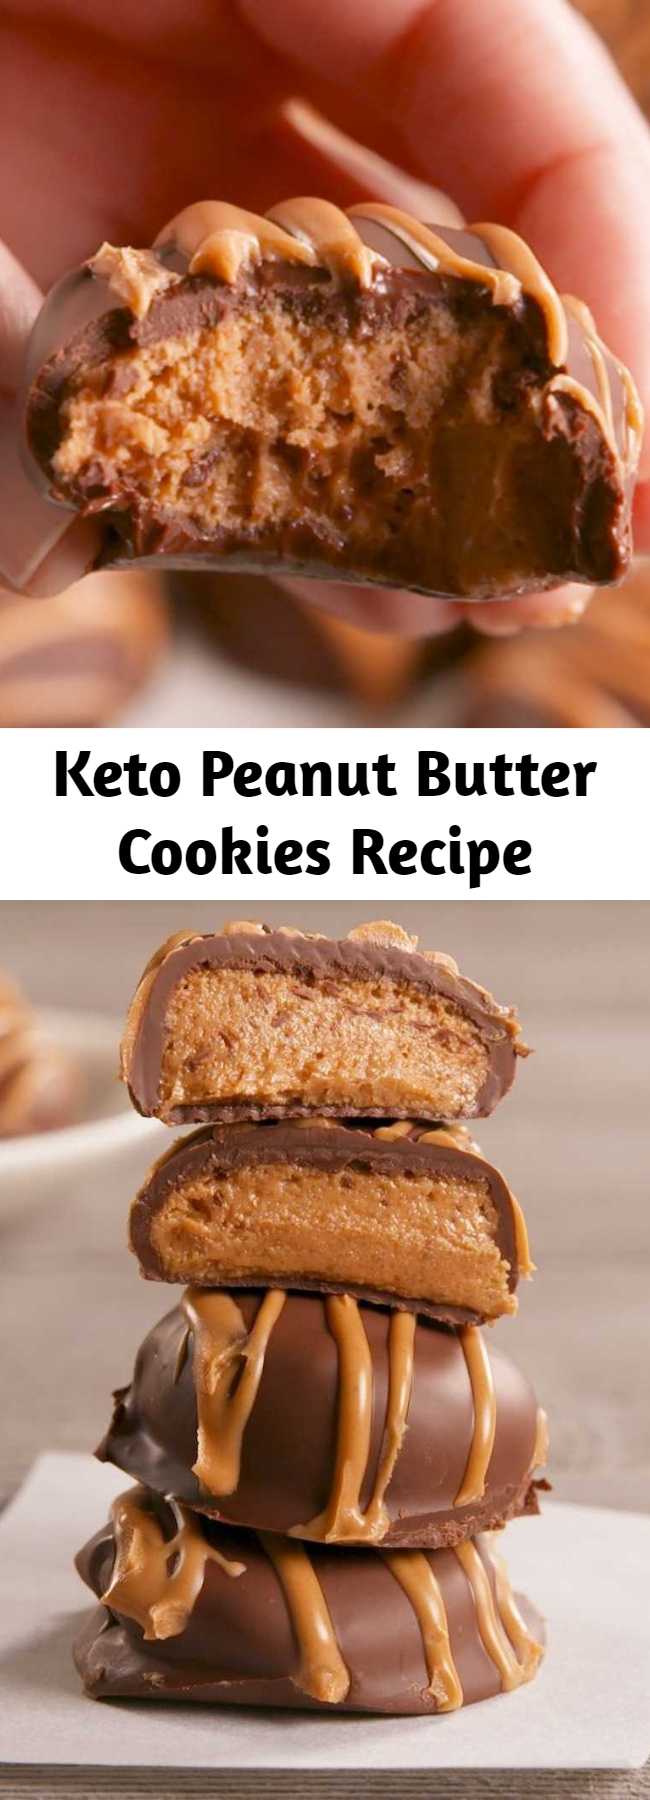 Keto Peanut Butter Cookies Recipe - A no-bake cookie that tastes like the best homemade peanut-butter cup you've ever had! Forget the guilt and have all the fun—we've re-edited this recipe to call for keto-friendly ingredients! #food #easyrecipe #keto #healthyeating #cleaneating